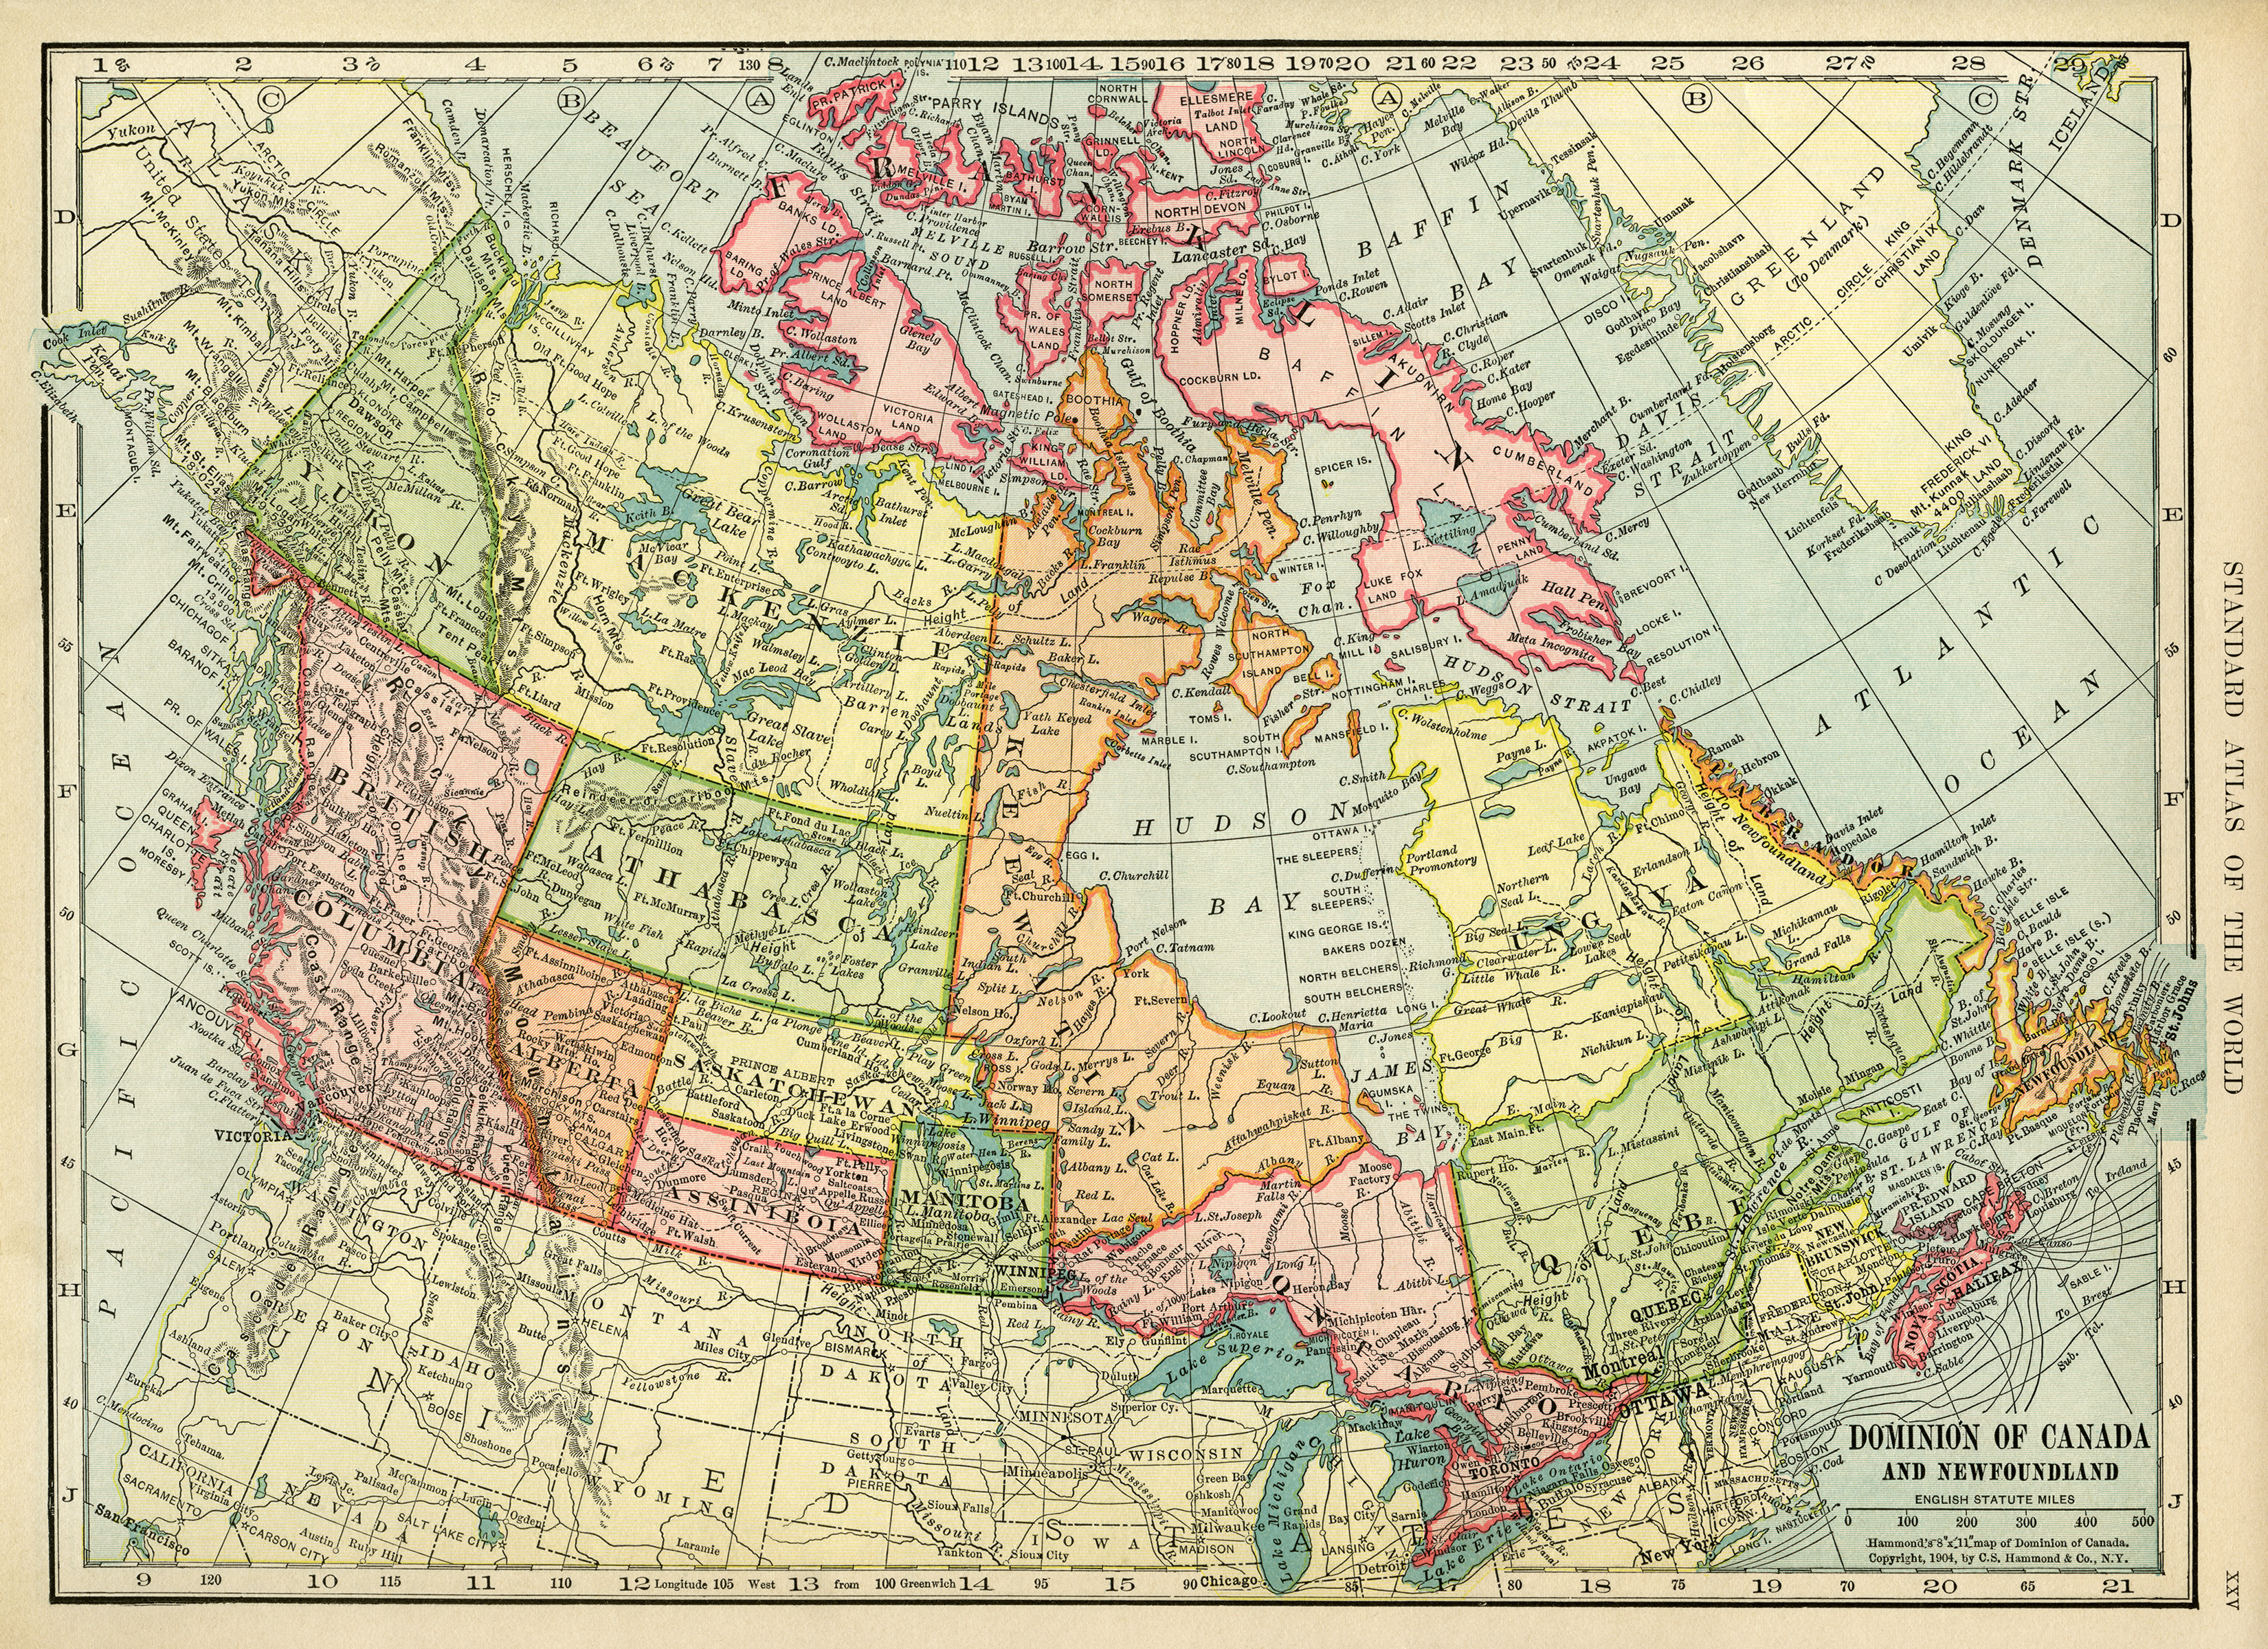 Canadian map, vintage map download, antique map Canada, C. S. Hammond, history geography Canada